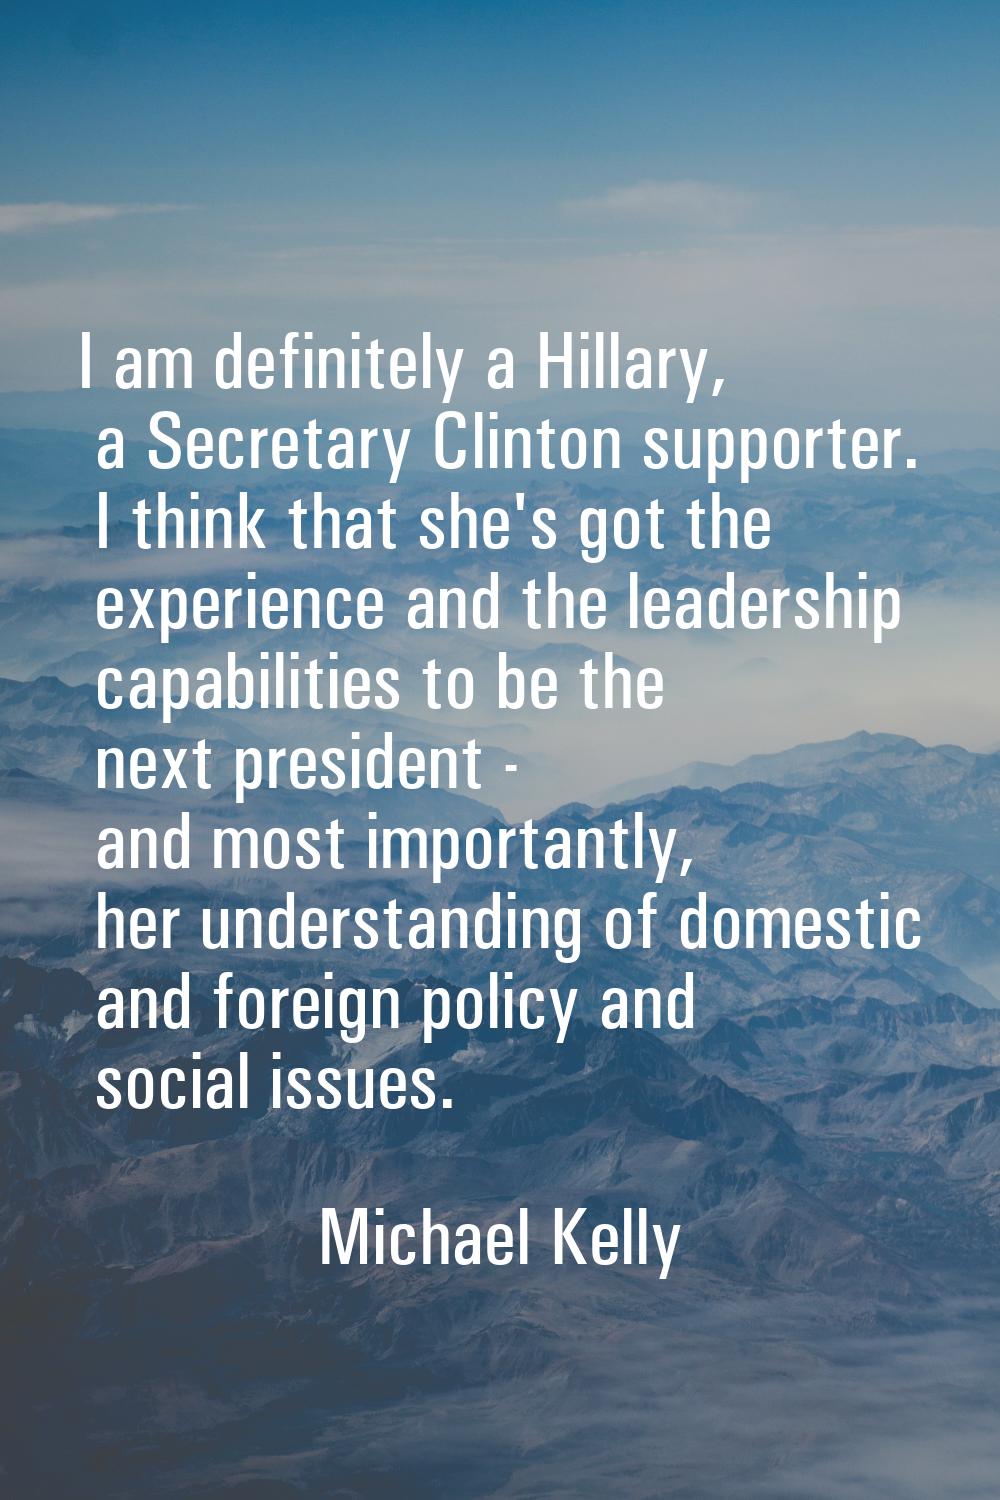 I am definitely a Hillary, a Secretary Clinton supporter. I think that she's got the experience and